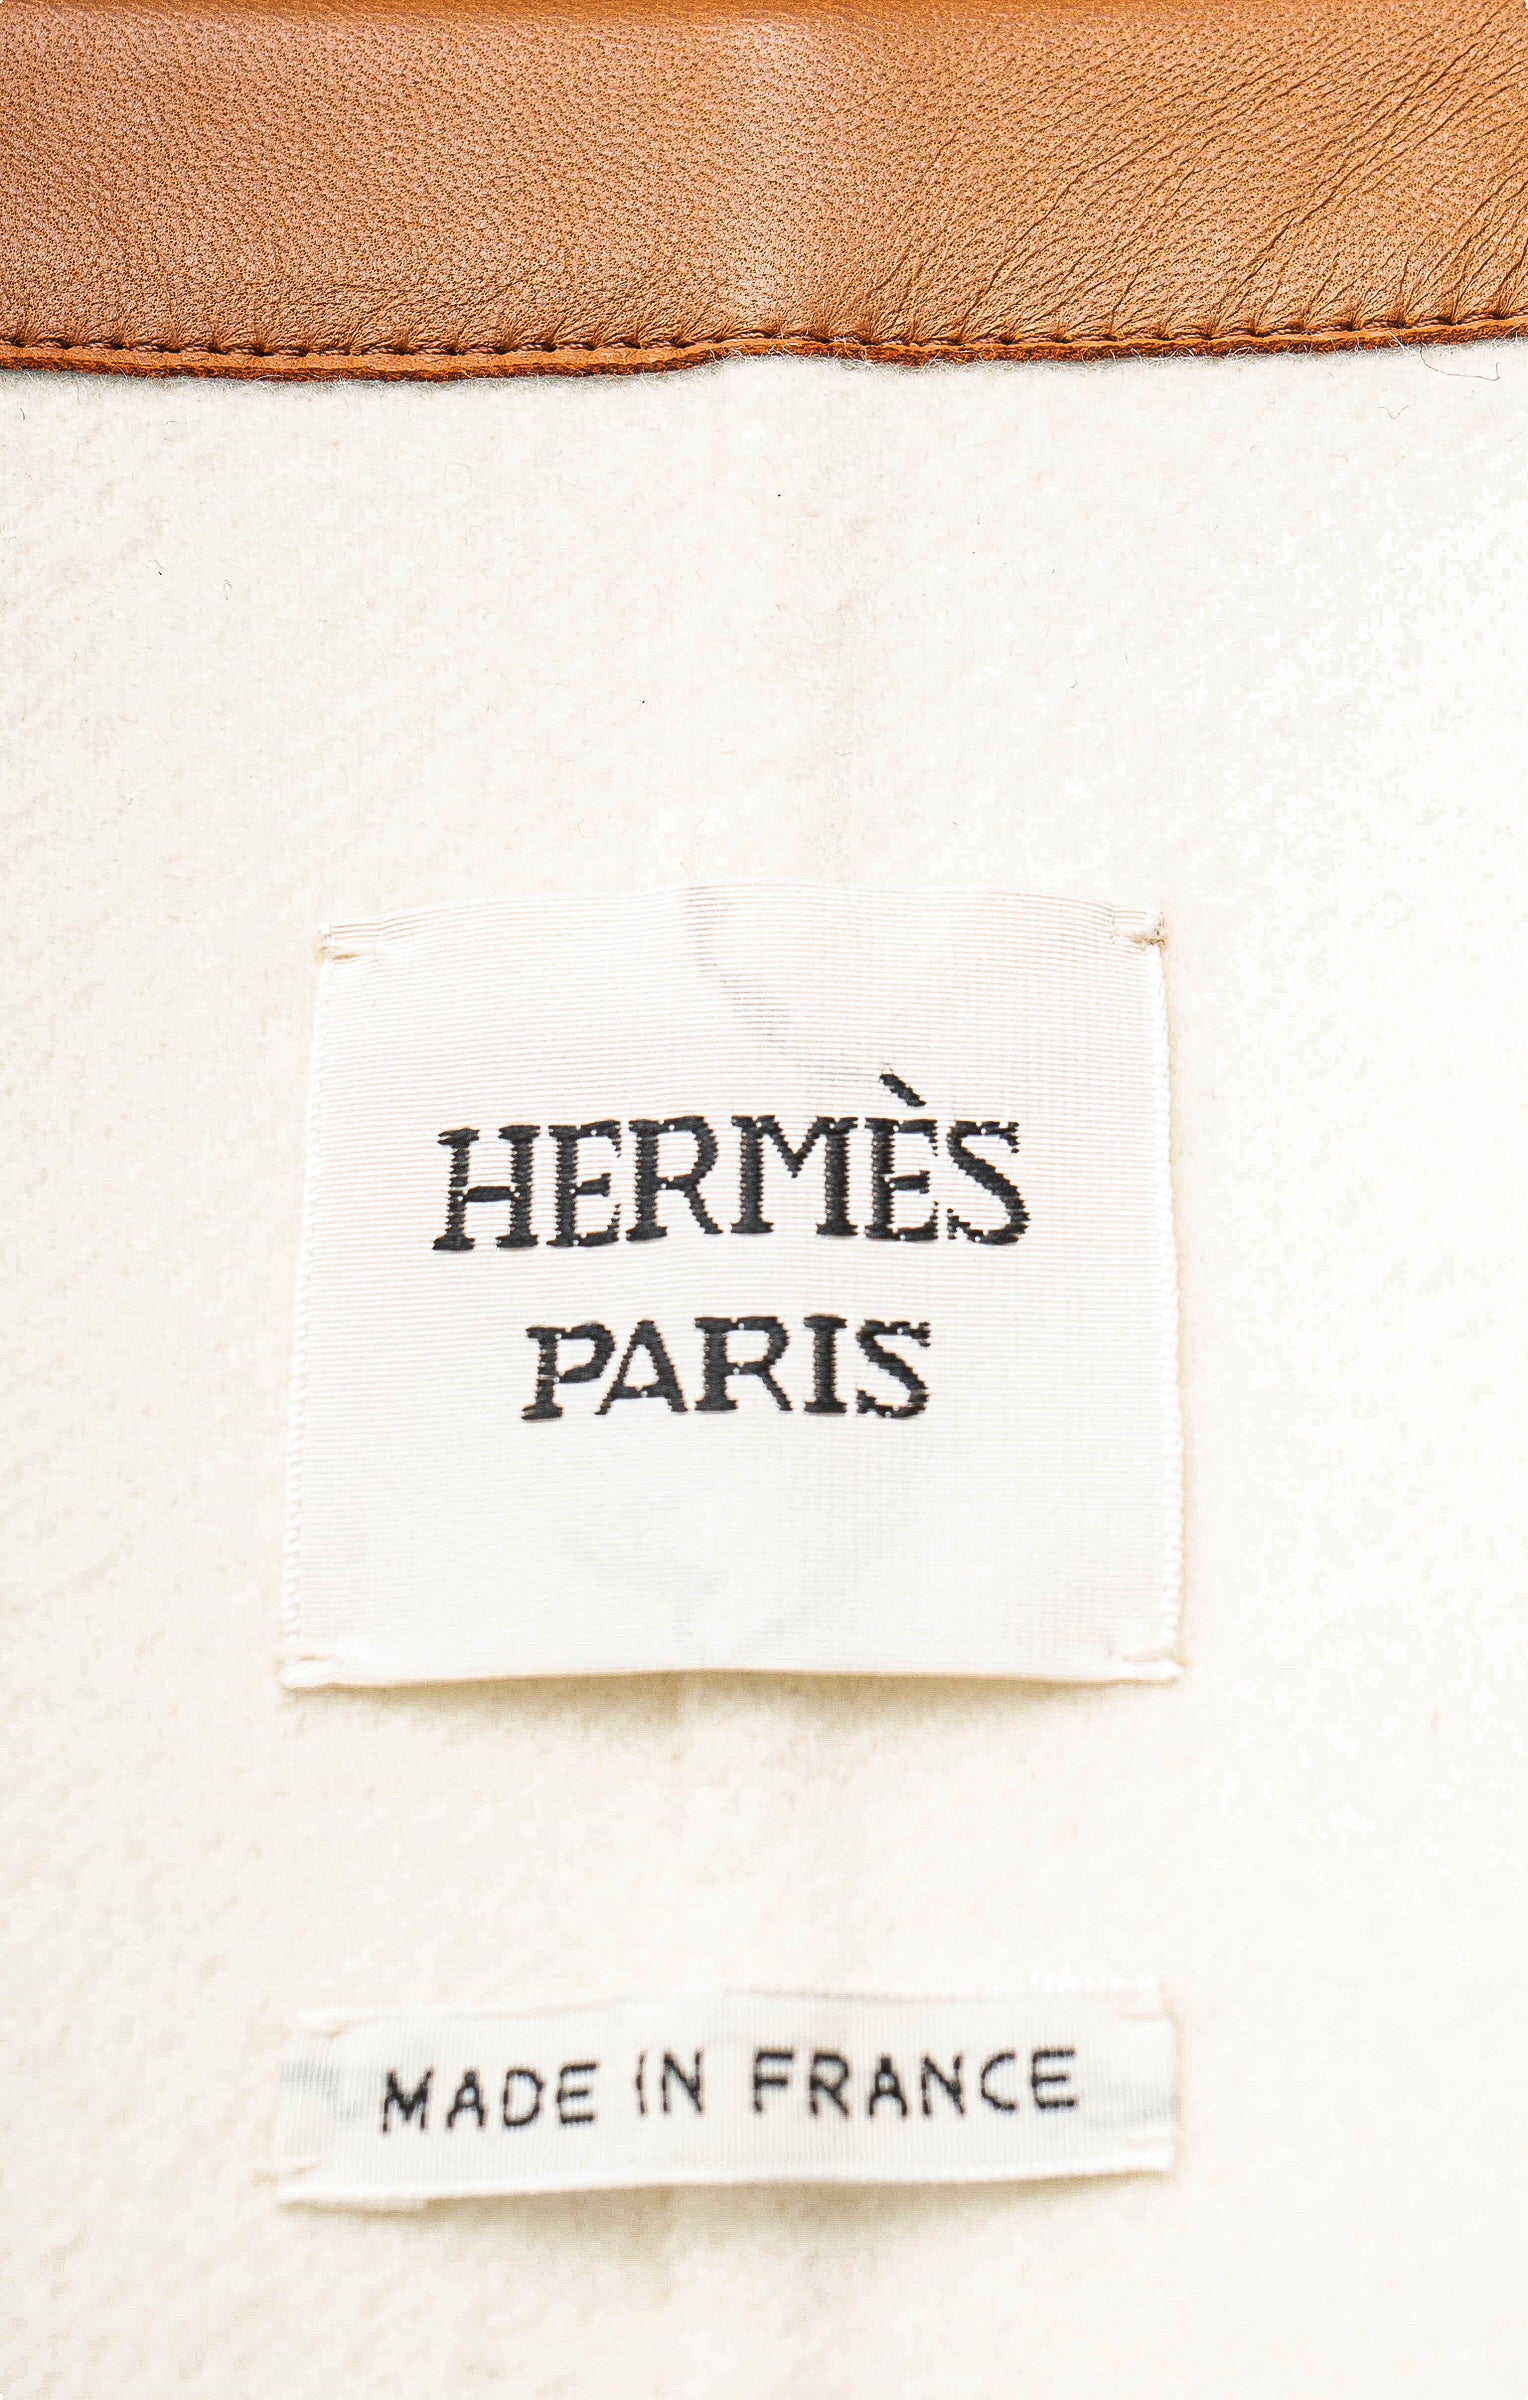 HERMÈS (RARE) Coat Size: FR 40 / Comparable to US 6-8